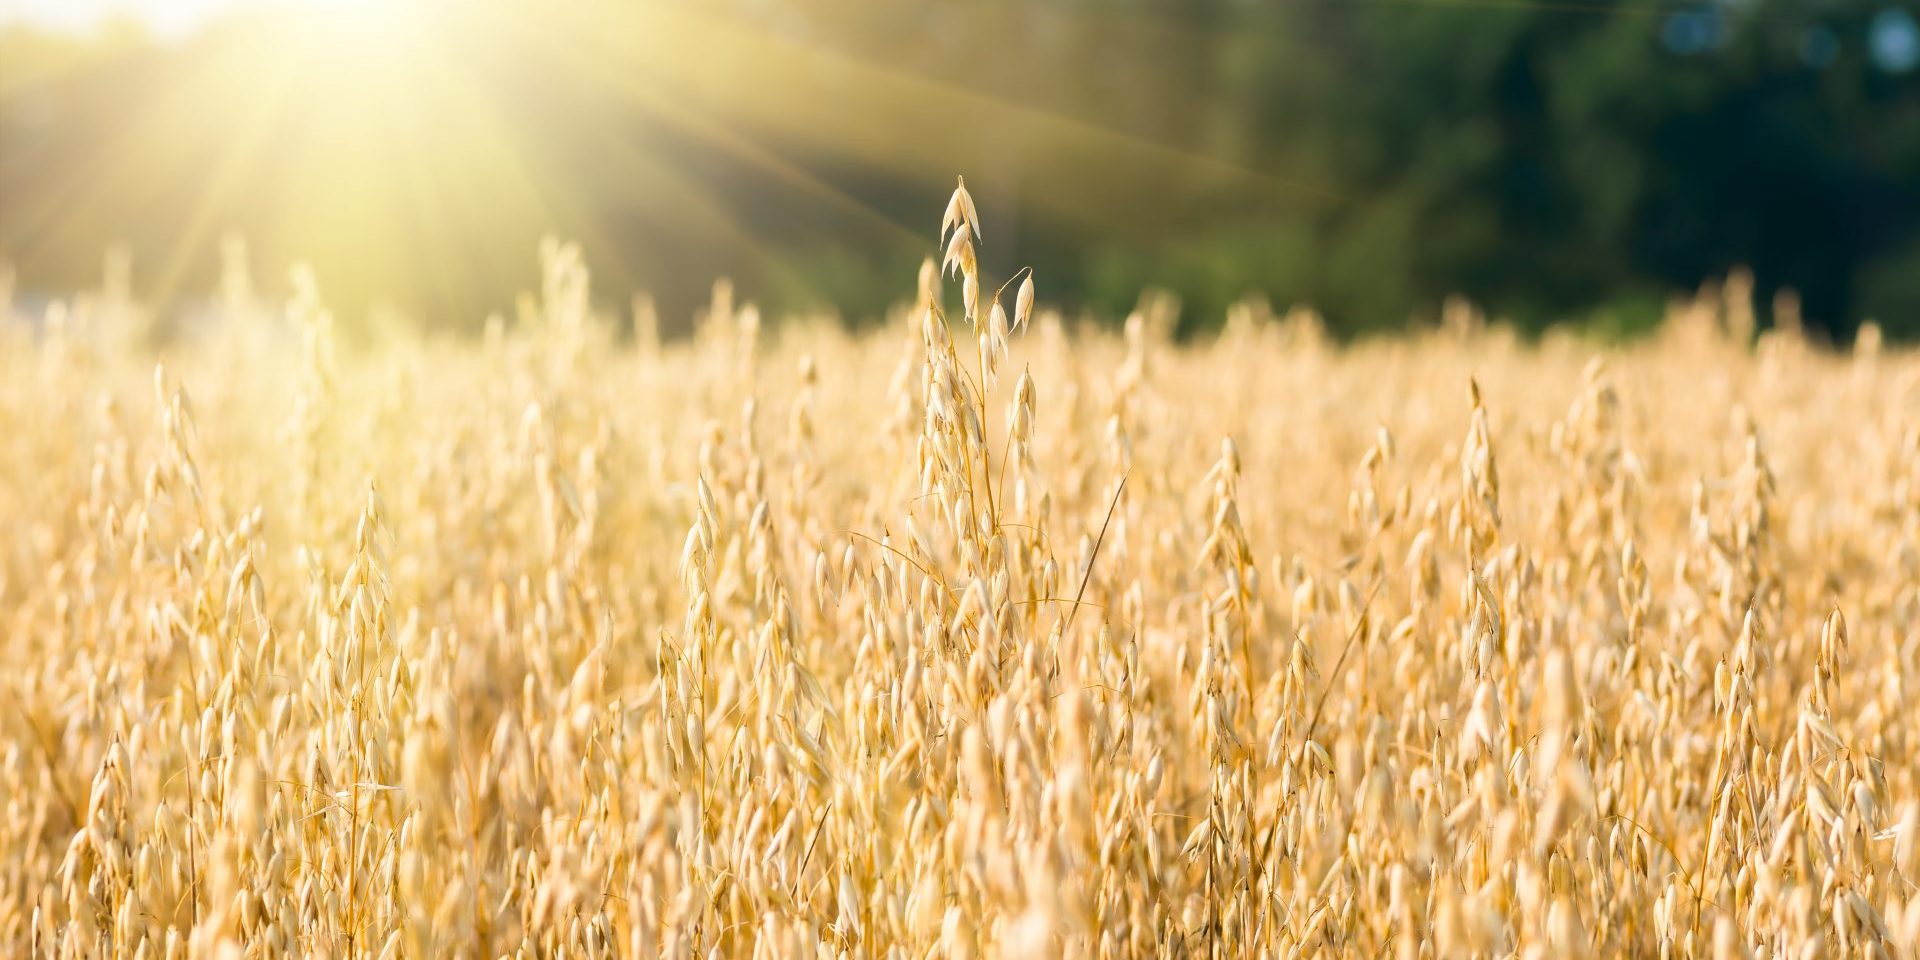 Oat field with sun flares in the background